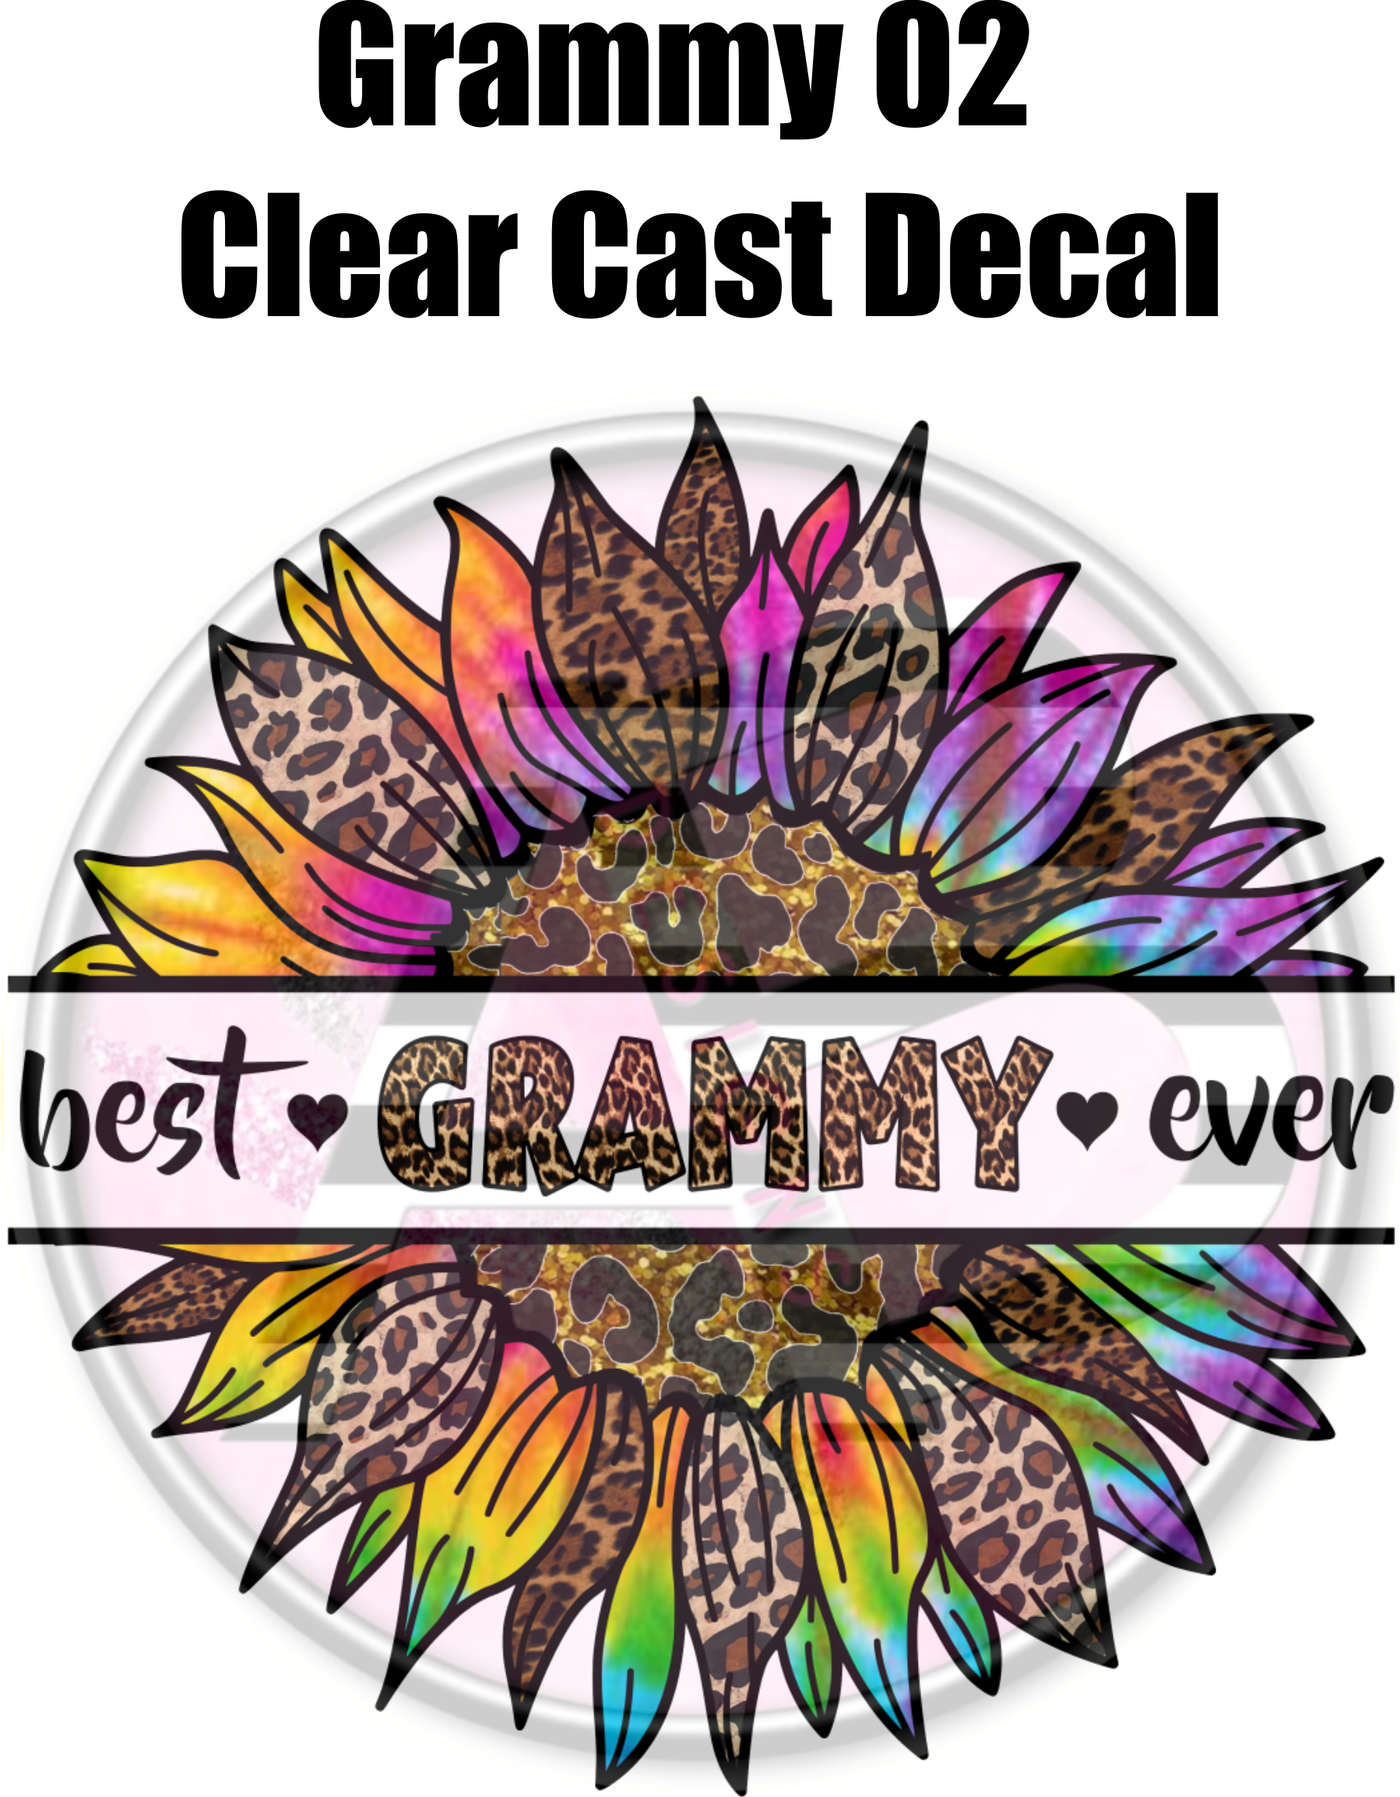 Grammy 02 - Clear Cast Decal